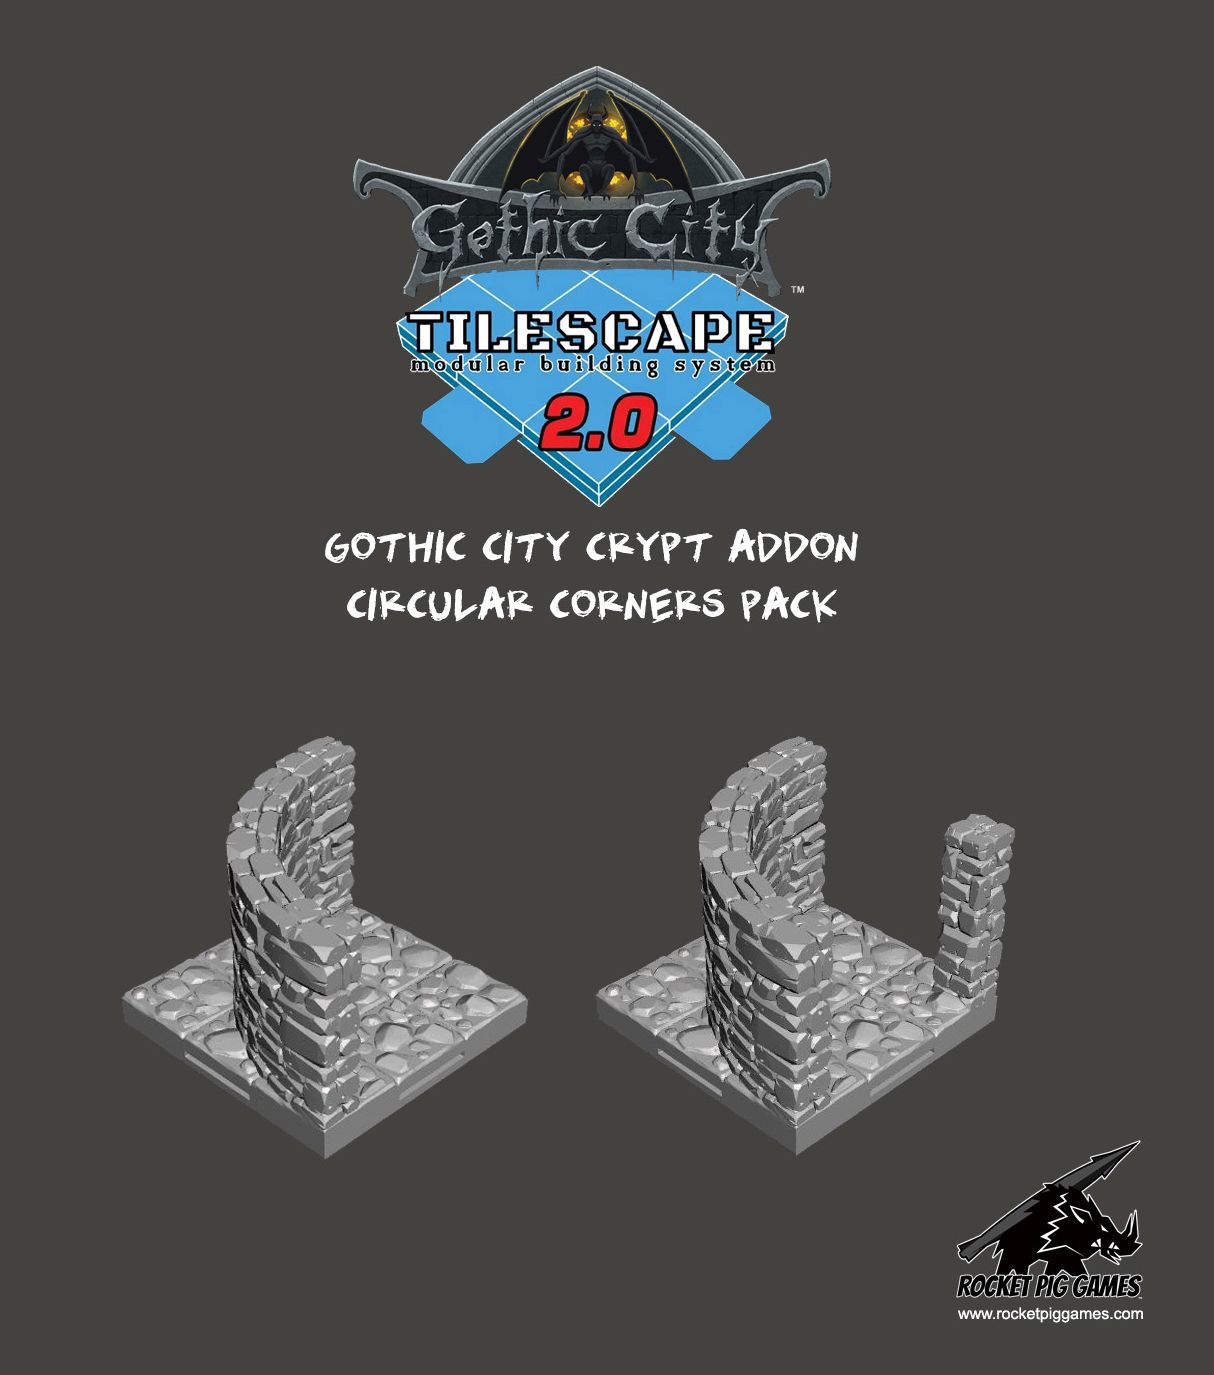 Tilescape™ GOTHIC CITY Crypt Addon Circular Corners Pack